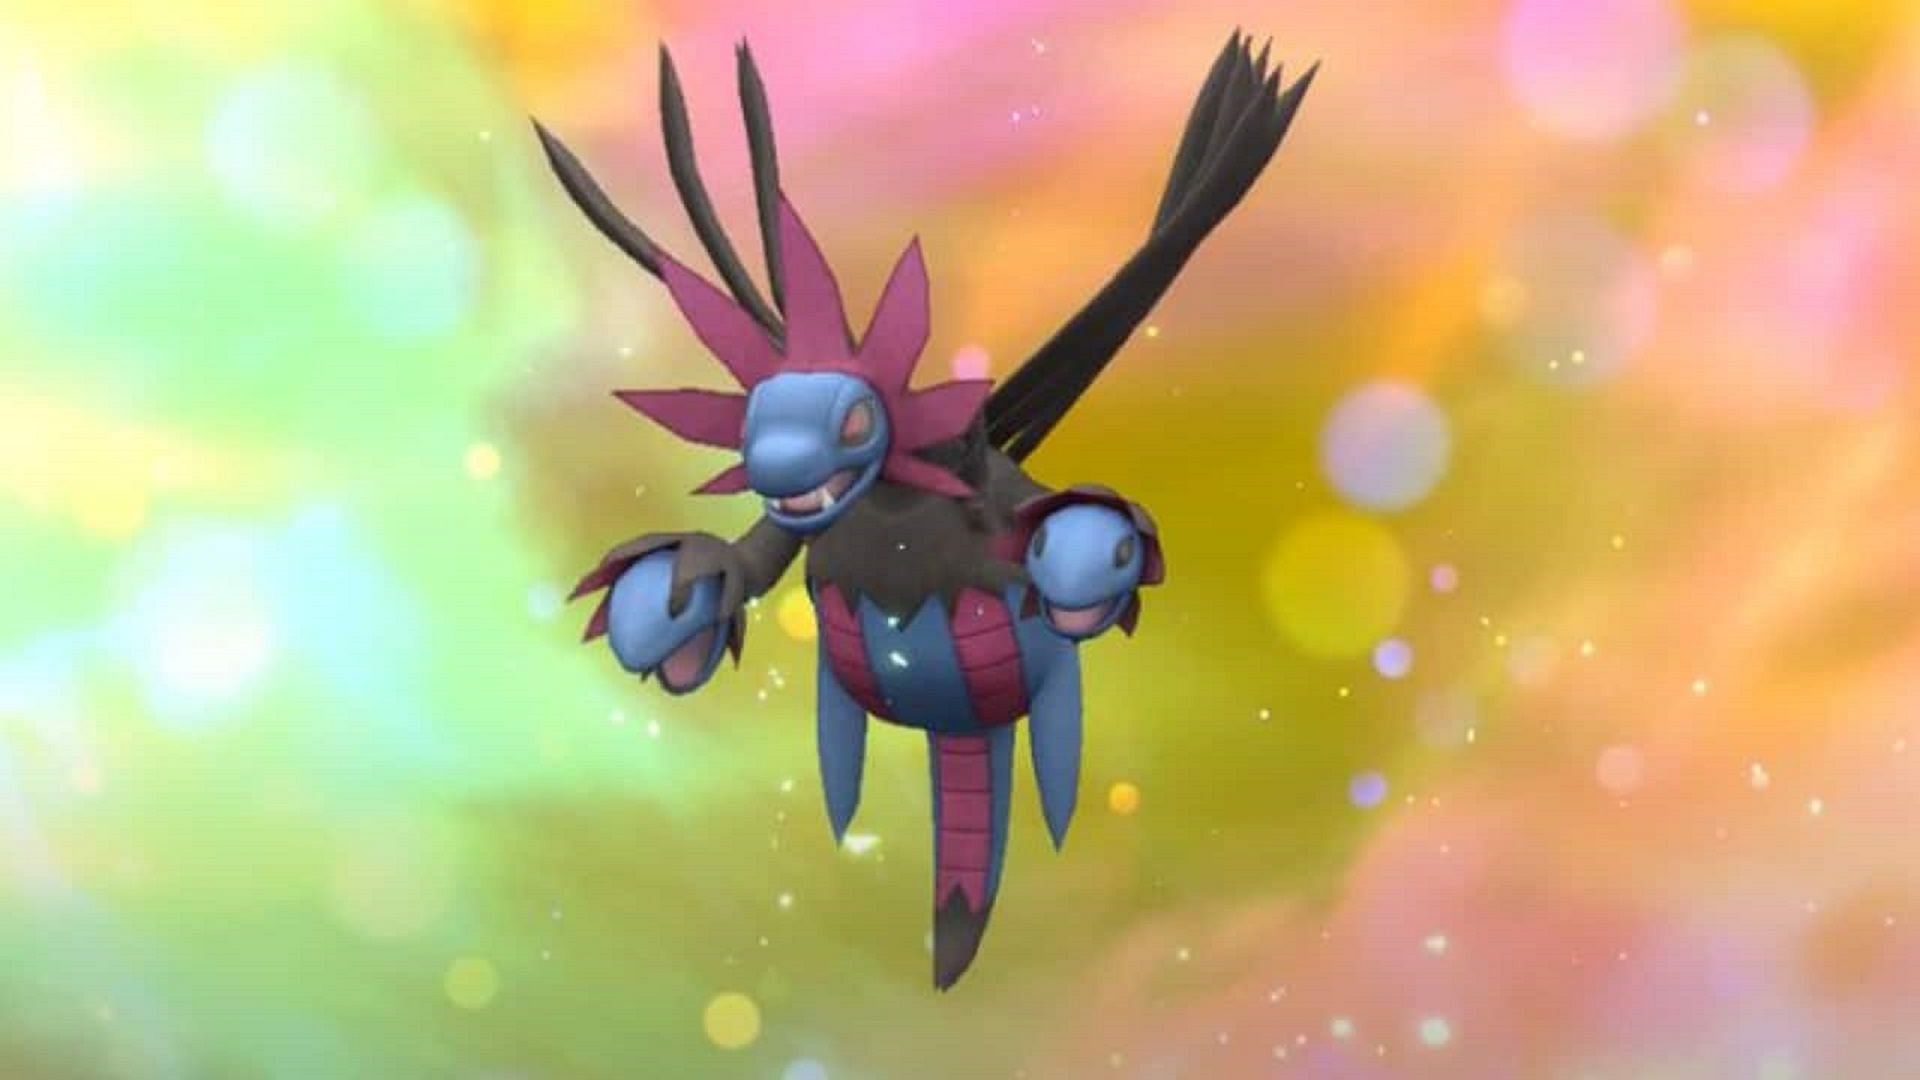 Hydreigon is considered a pseudo-legendary Pokemon and appears in Pokemon Scarlet and Violet (Image via Game Freak)